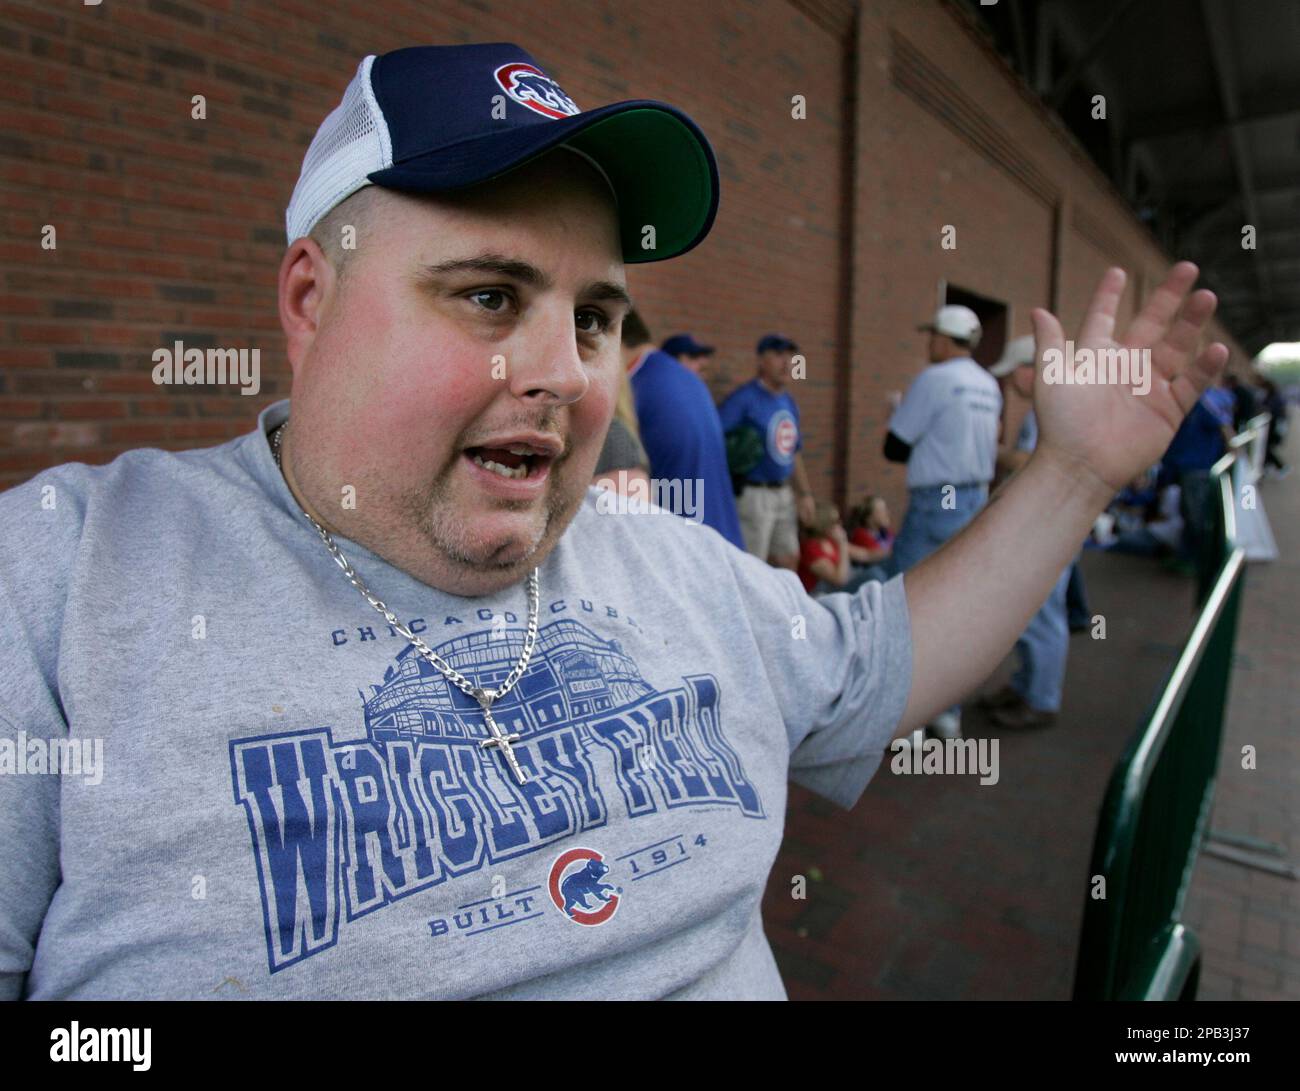 Patrick Butcher, a 38-year-old Chicagoan, waits outside Wrigley Field for  bleacher seats before the Cubs Reds game in Chicago, Monday, Sept. 17,  2007. Butcher worries some fan might play a role in